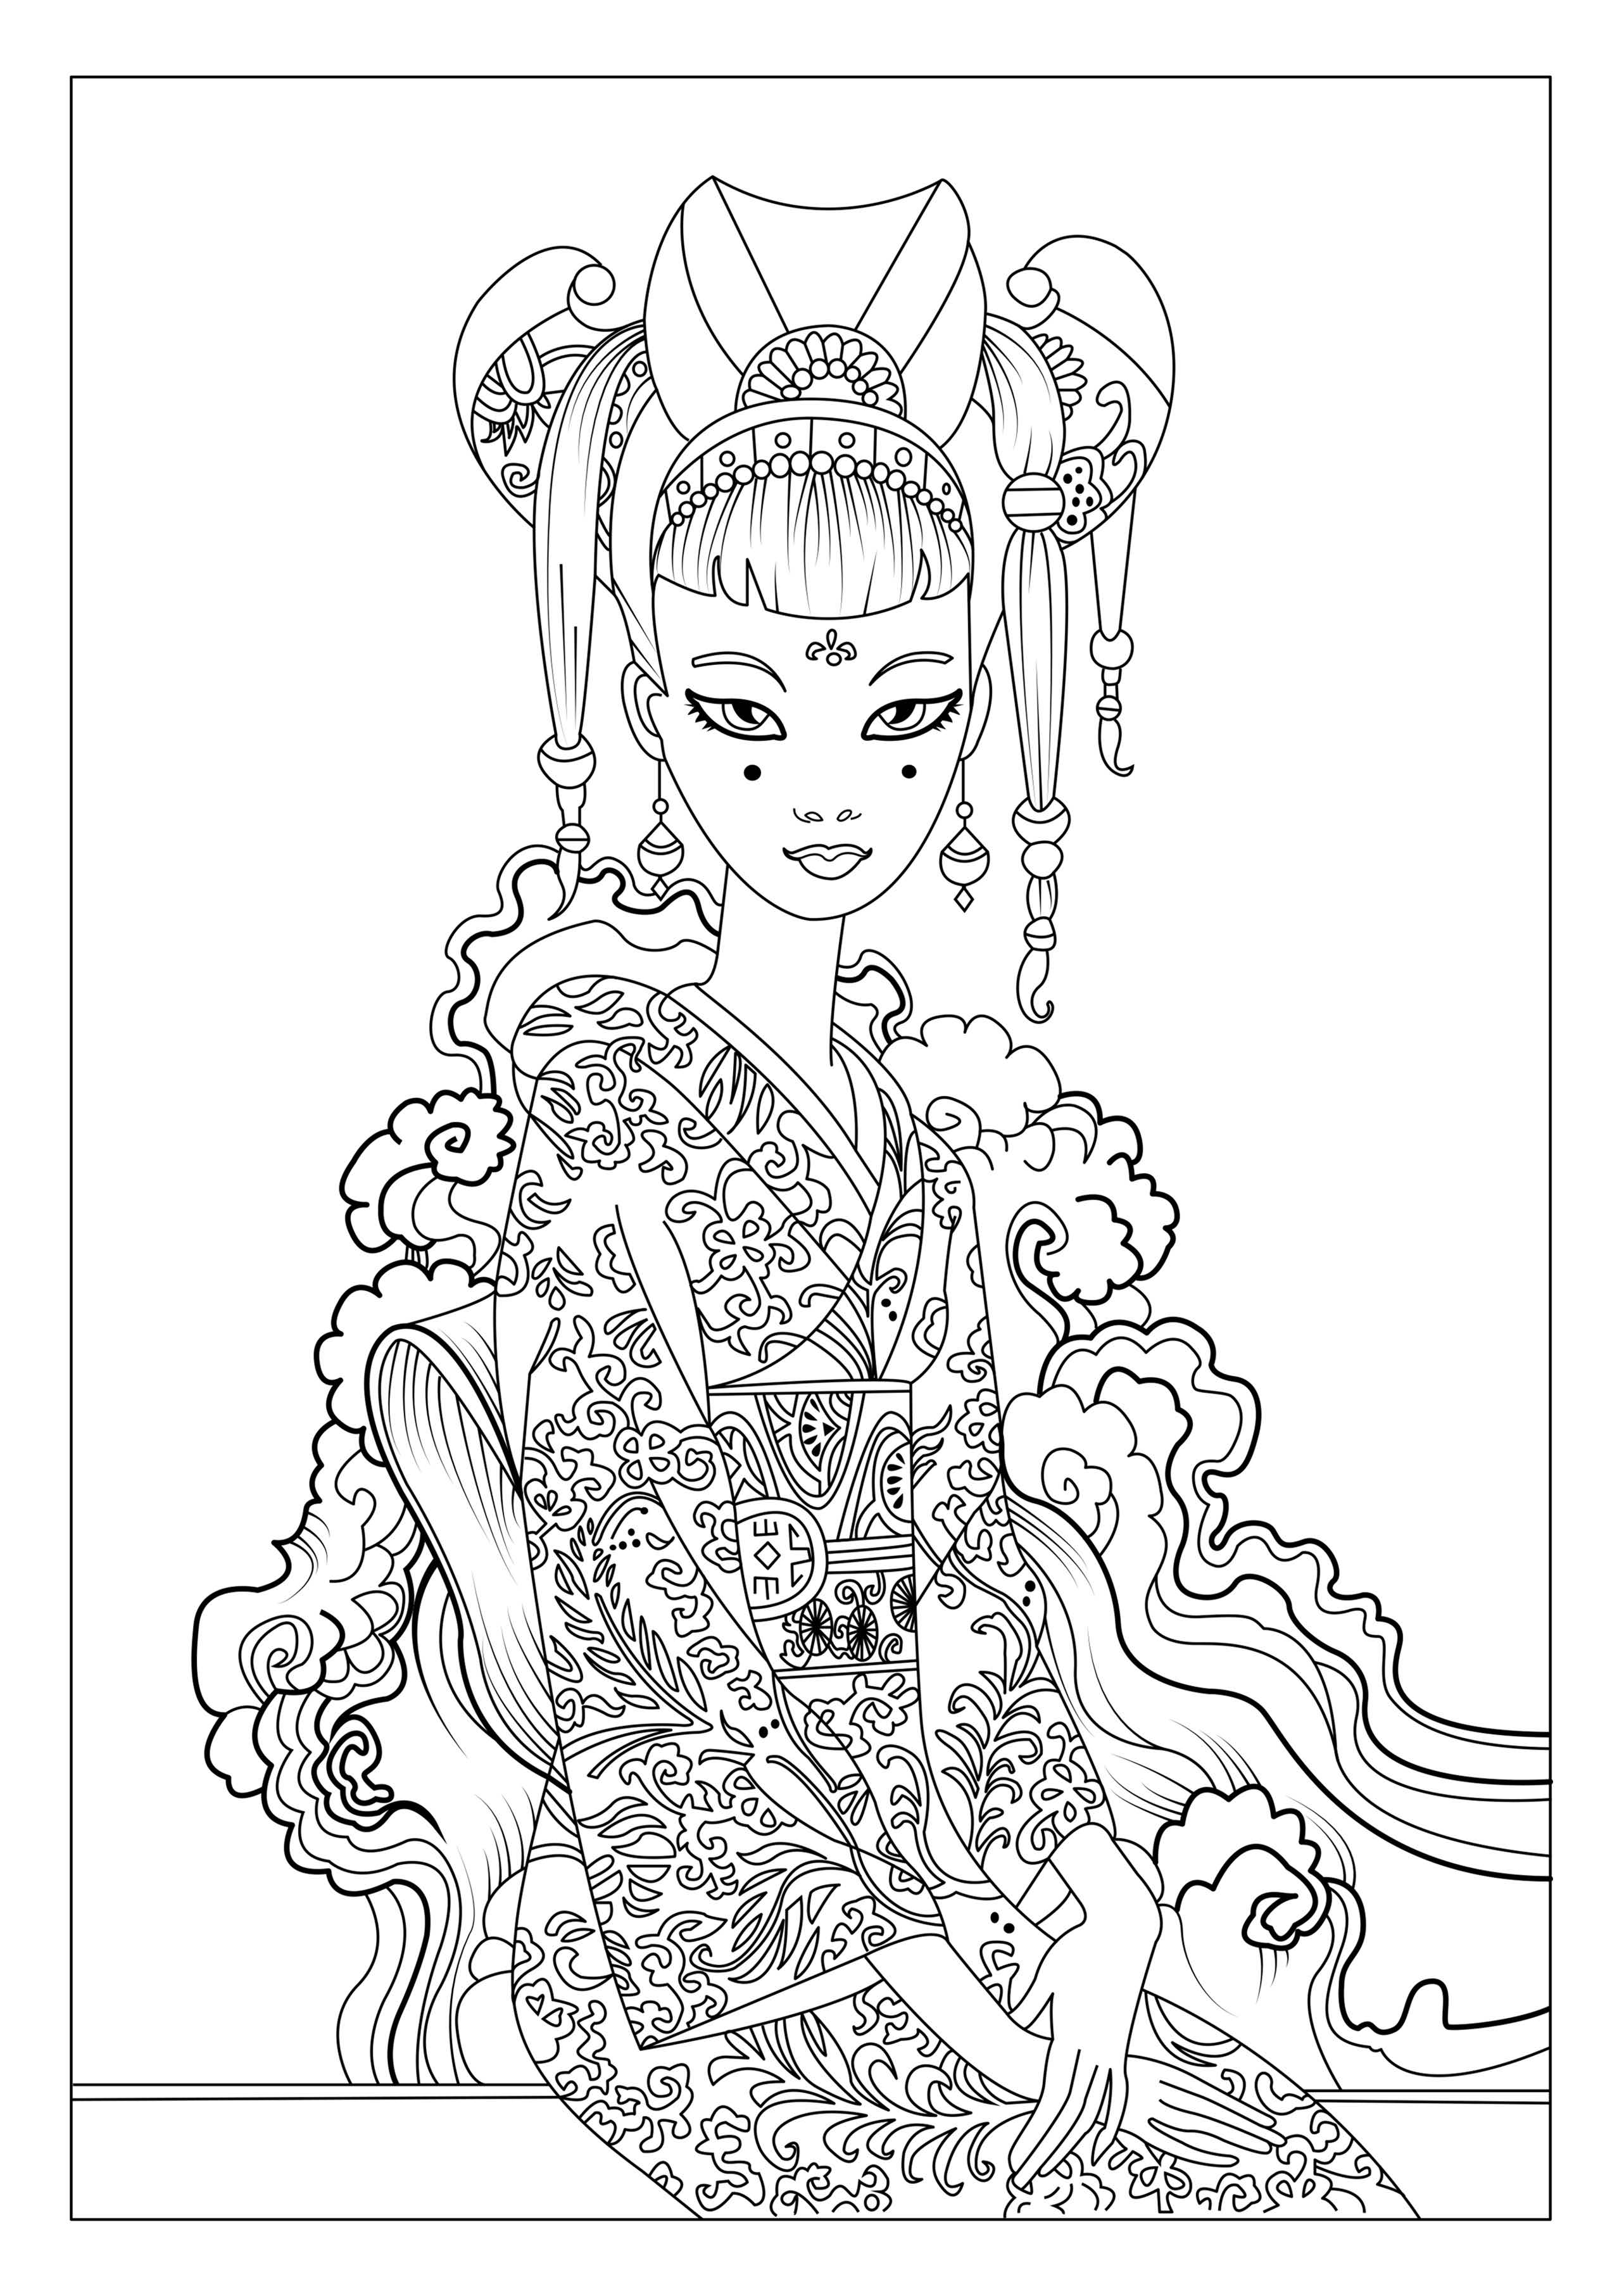 This is our coloring page with a japan woman by Céline